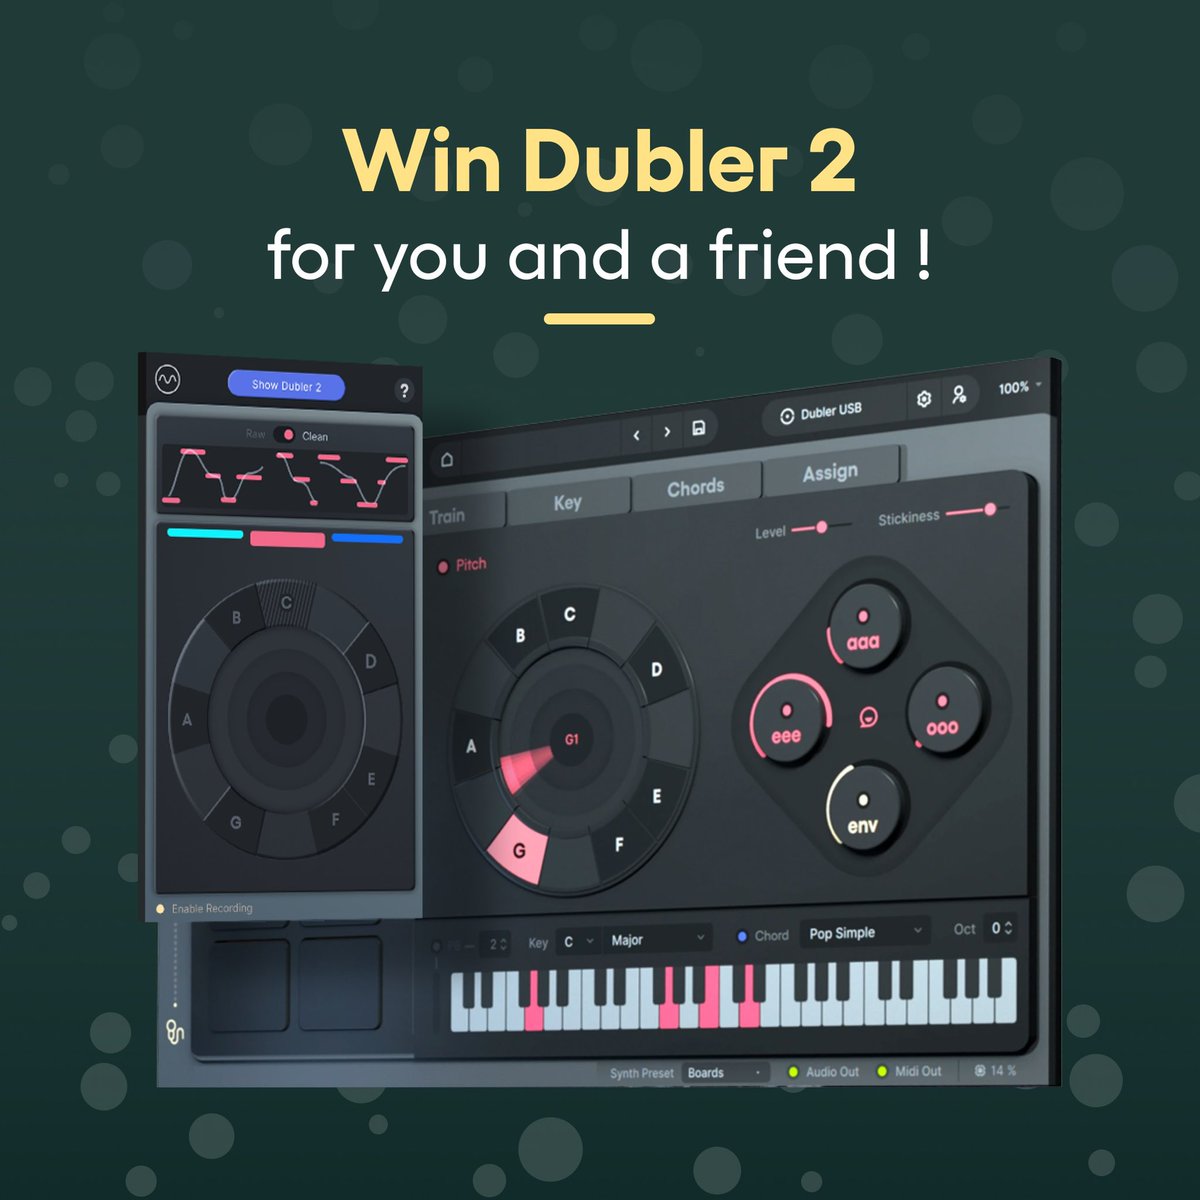 Black Friday is behind us but the holiday season is just getting started! ❄️ Join our holiday competition on Instagram - @vochlea - to win a Dubler 2 license for you and a friend!🎤